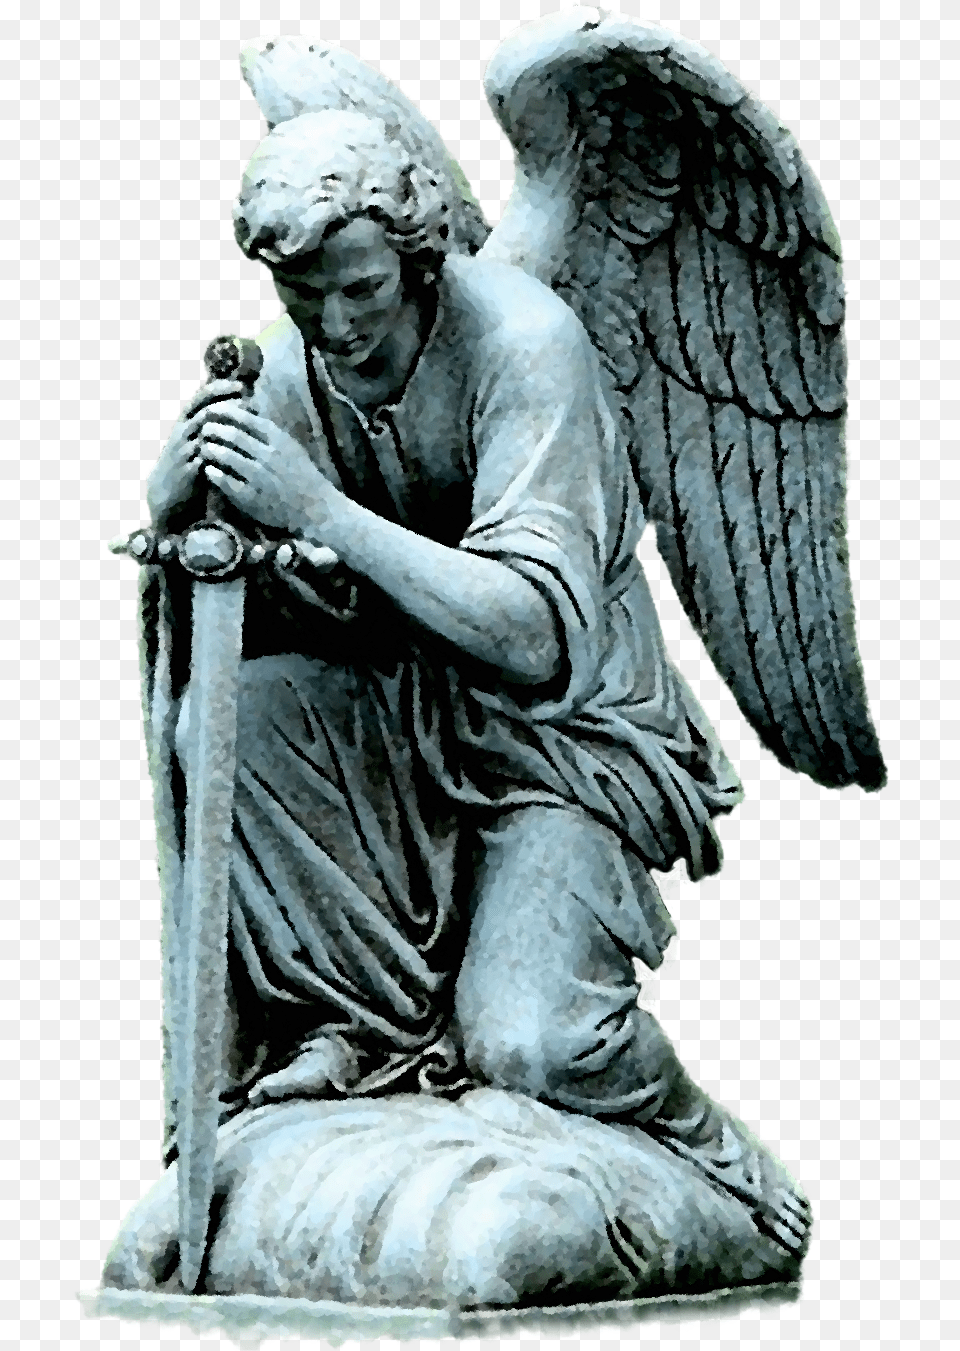 A Strong Blond Beer With A Fruity And Herbal Aroma Joseph39s Studio Kneeling Male Angel Statue, Person, Adult, Man, Art Png Image